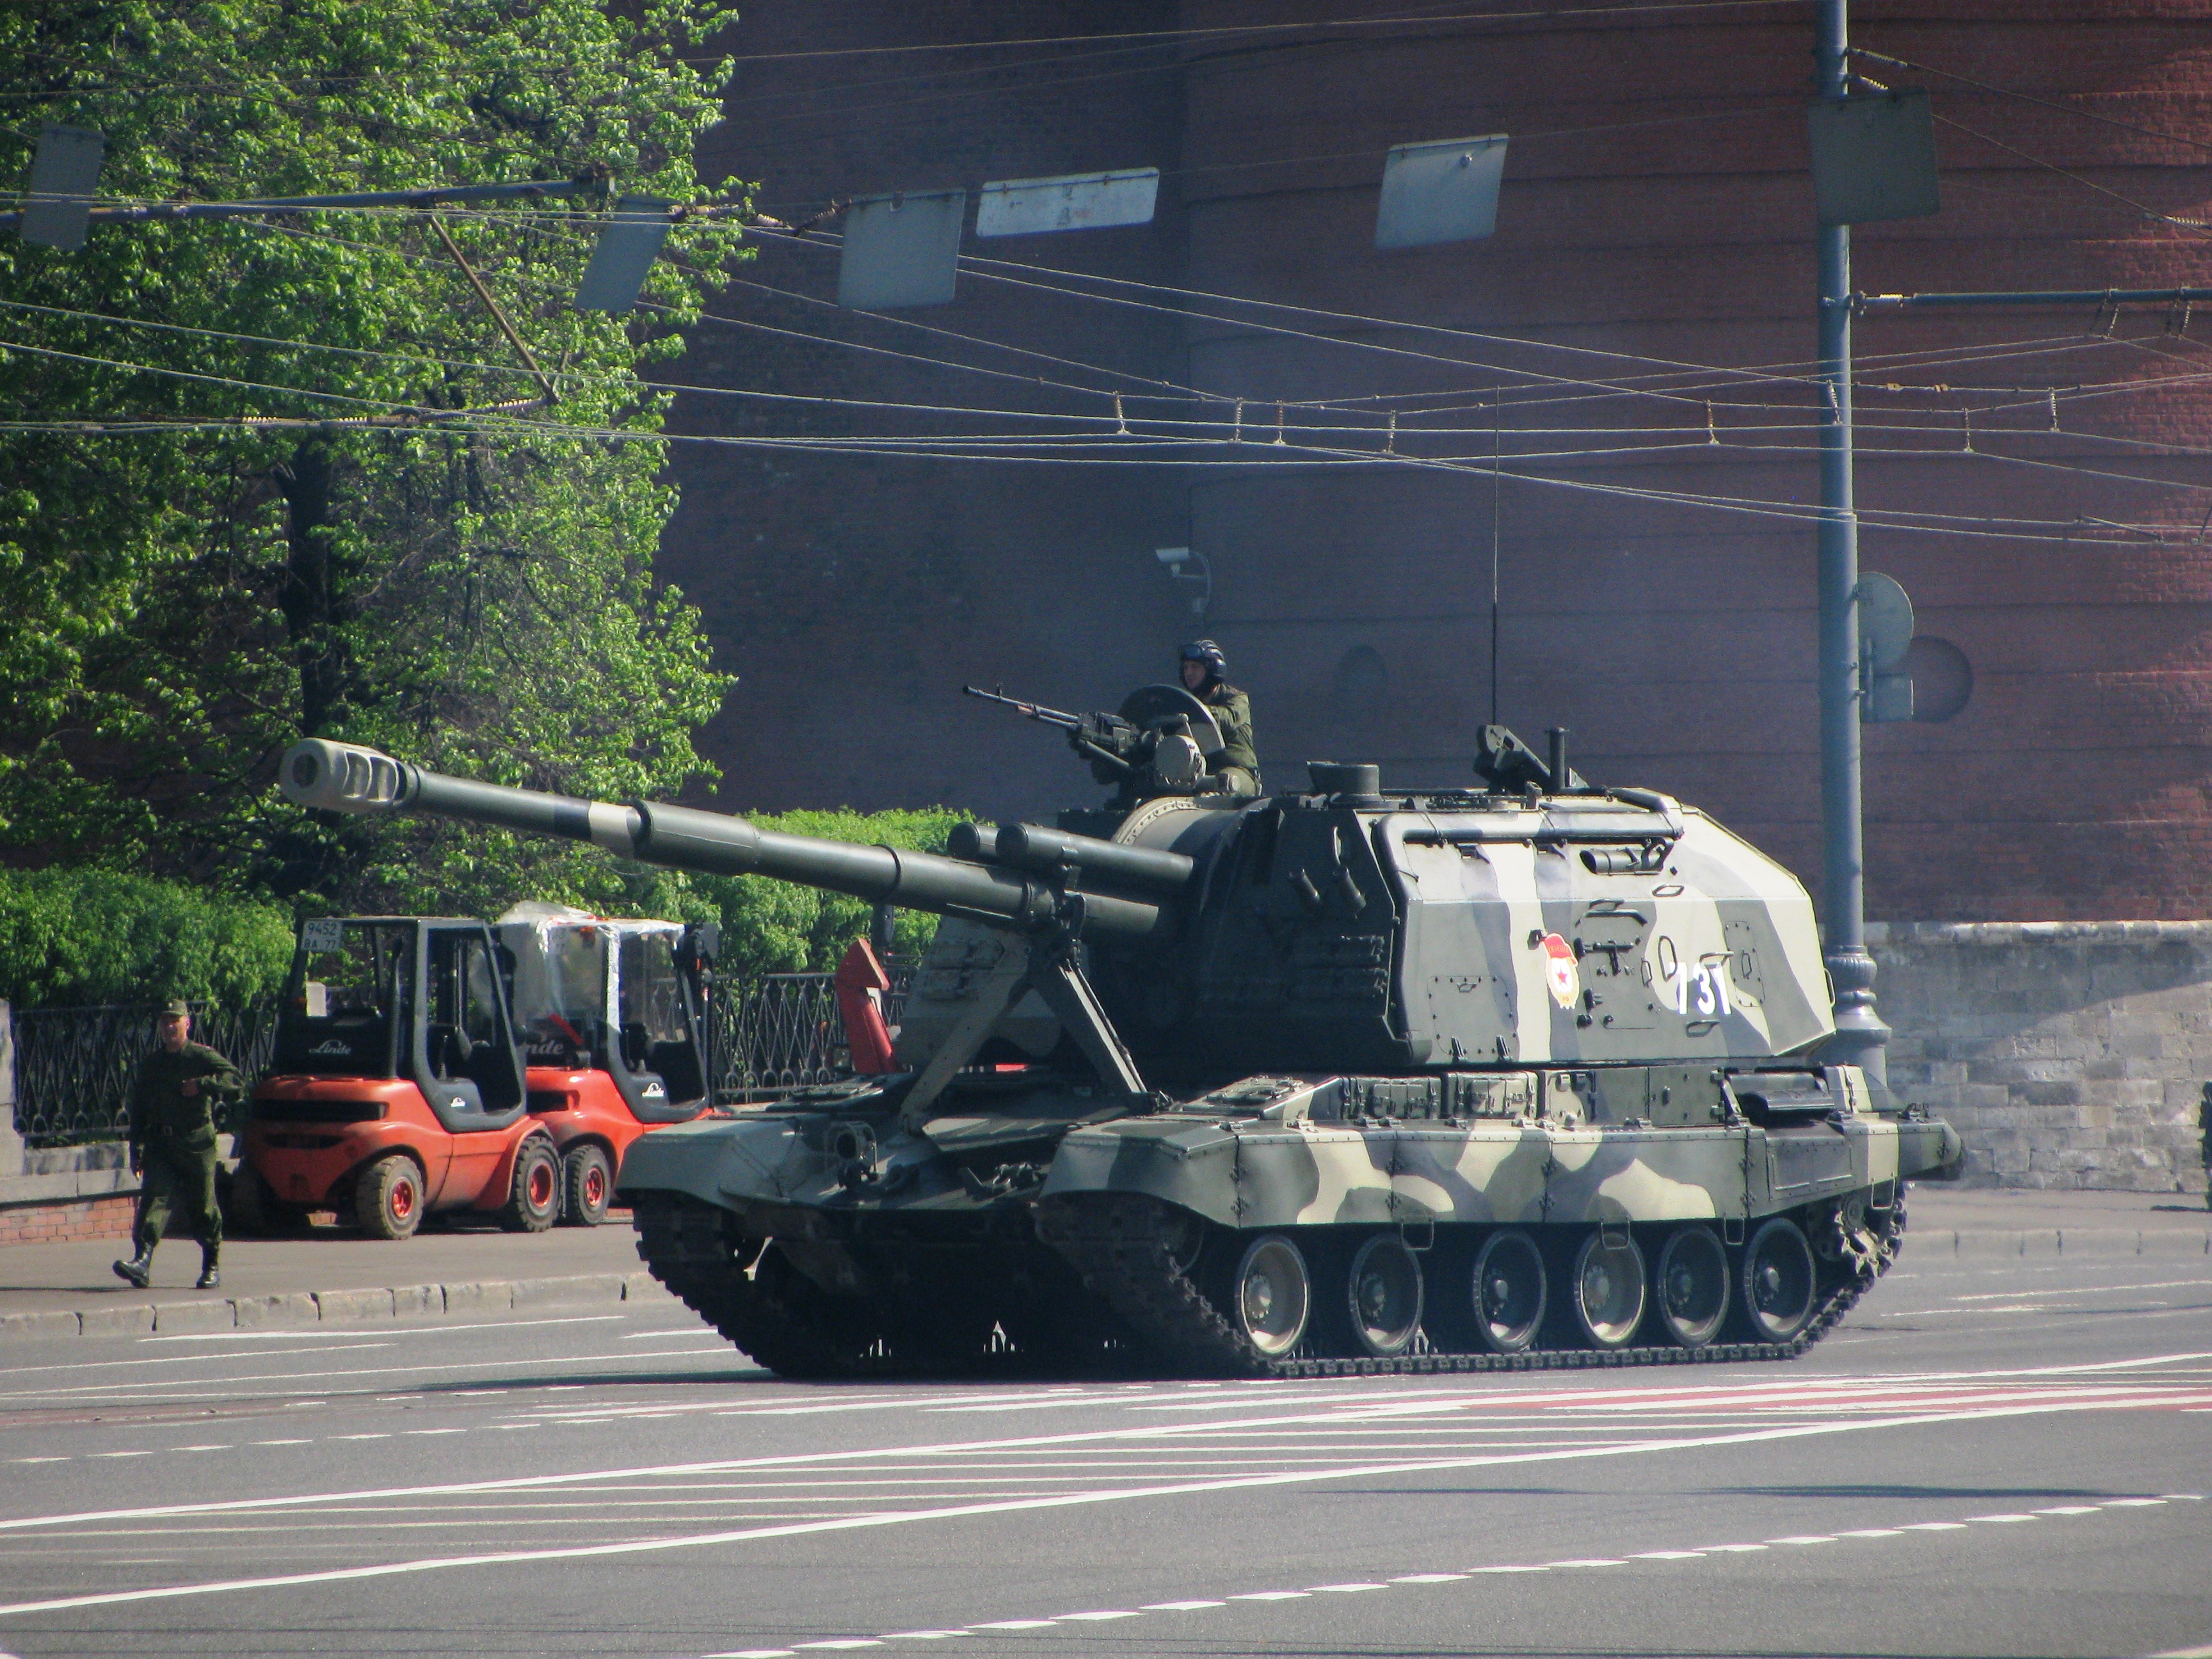 2S19 Msta-S Self-Propelled Howitzer (Russia)